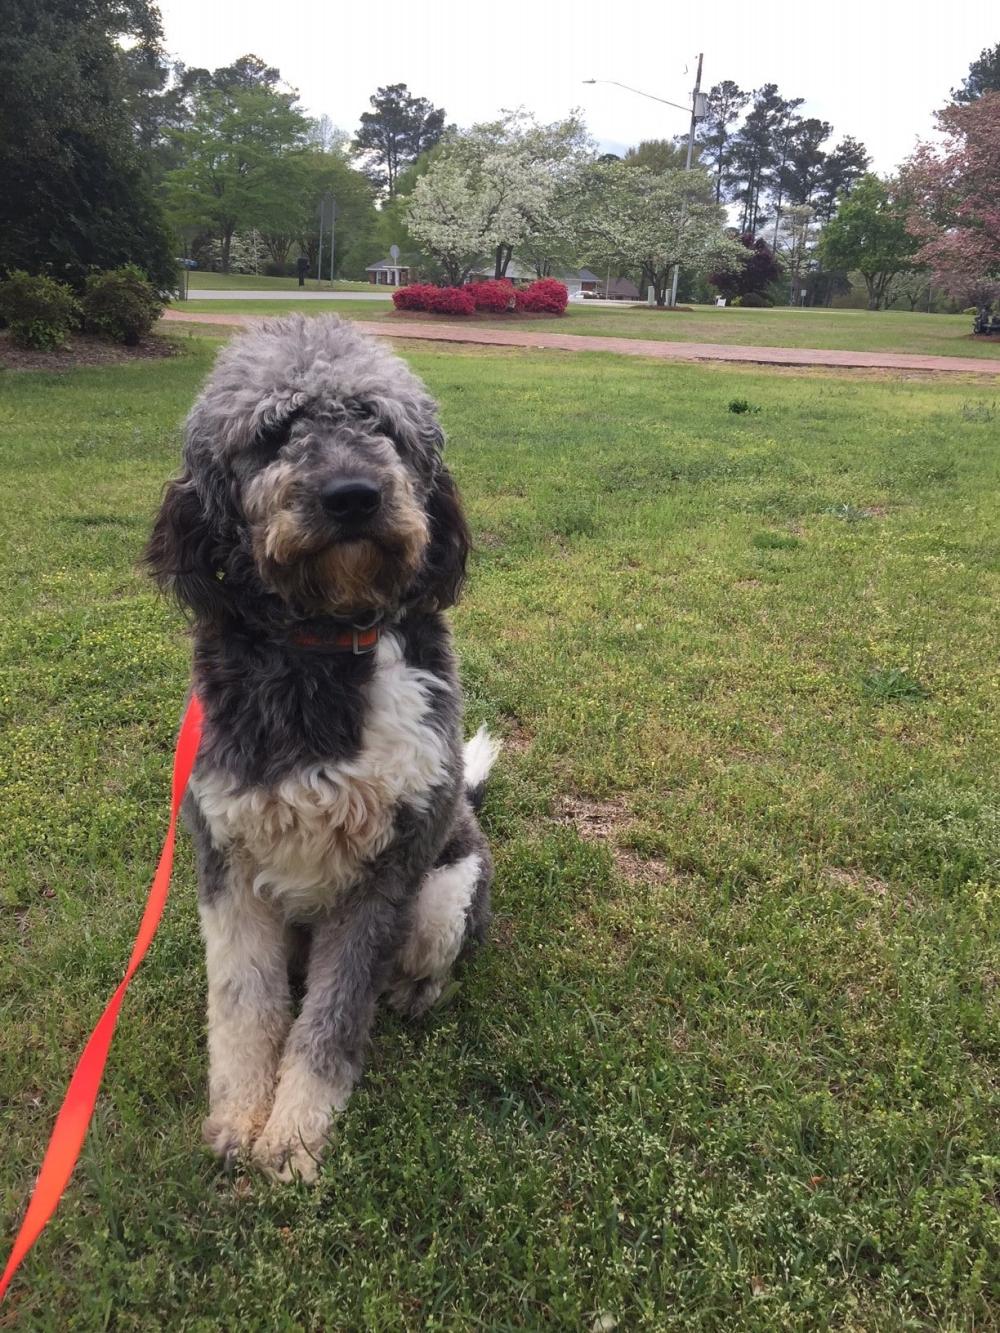 George, the one year old Newfiedoodle